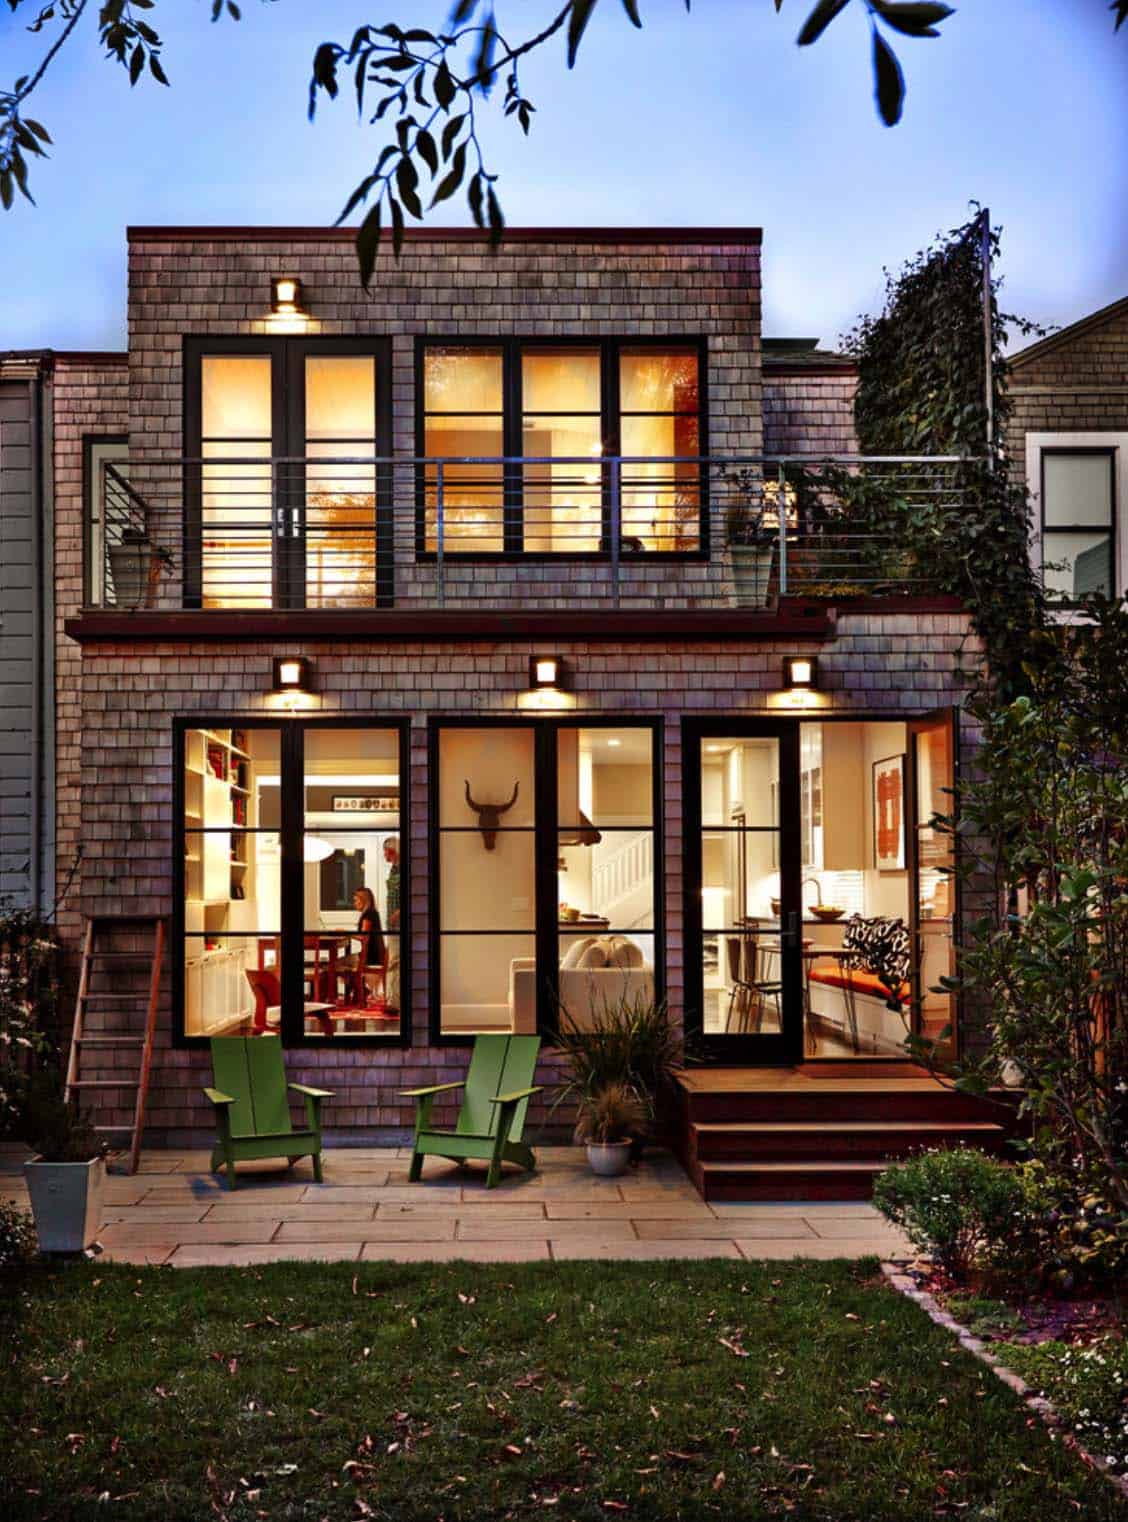 Traditional Edwardian home gets rehabbed in San Francisco Bay Area